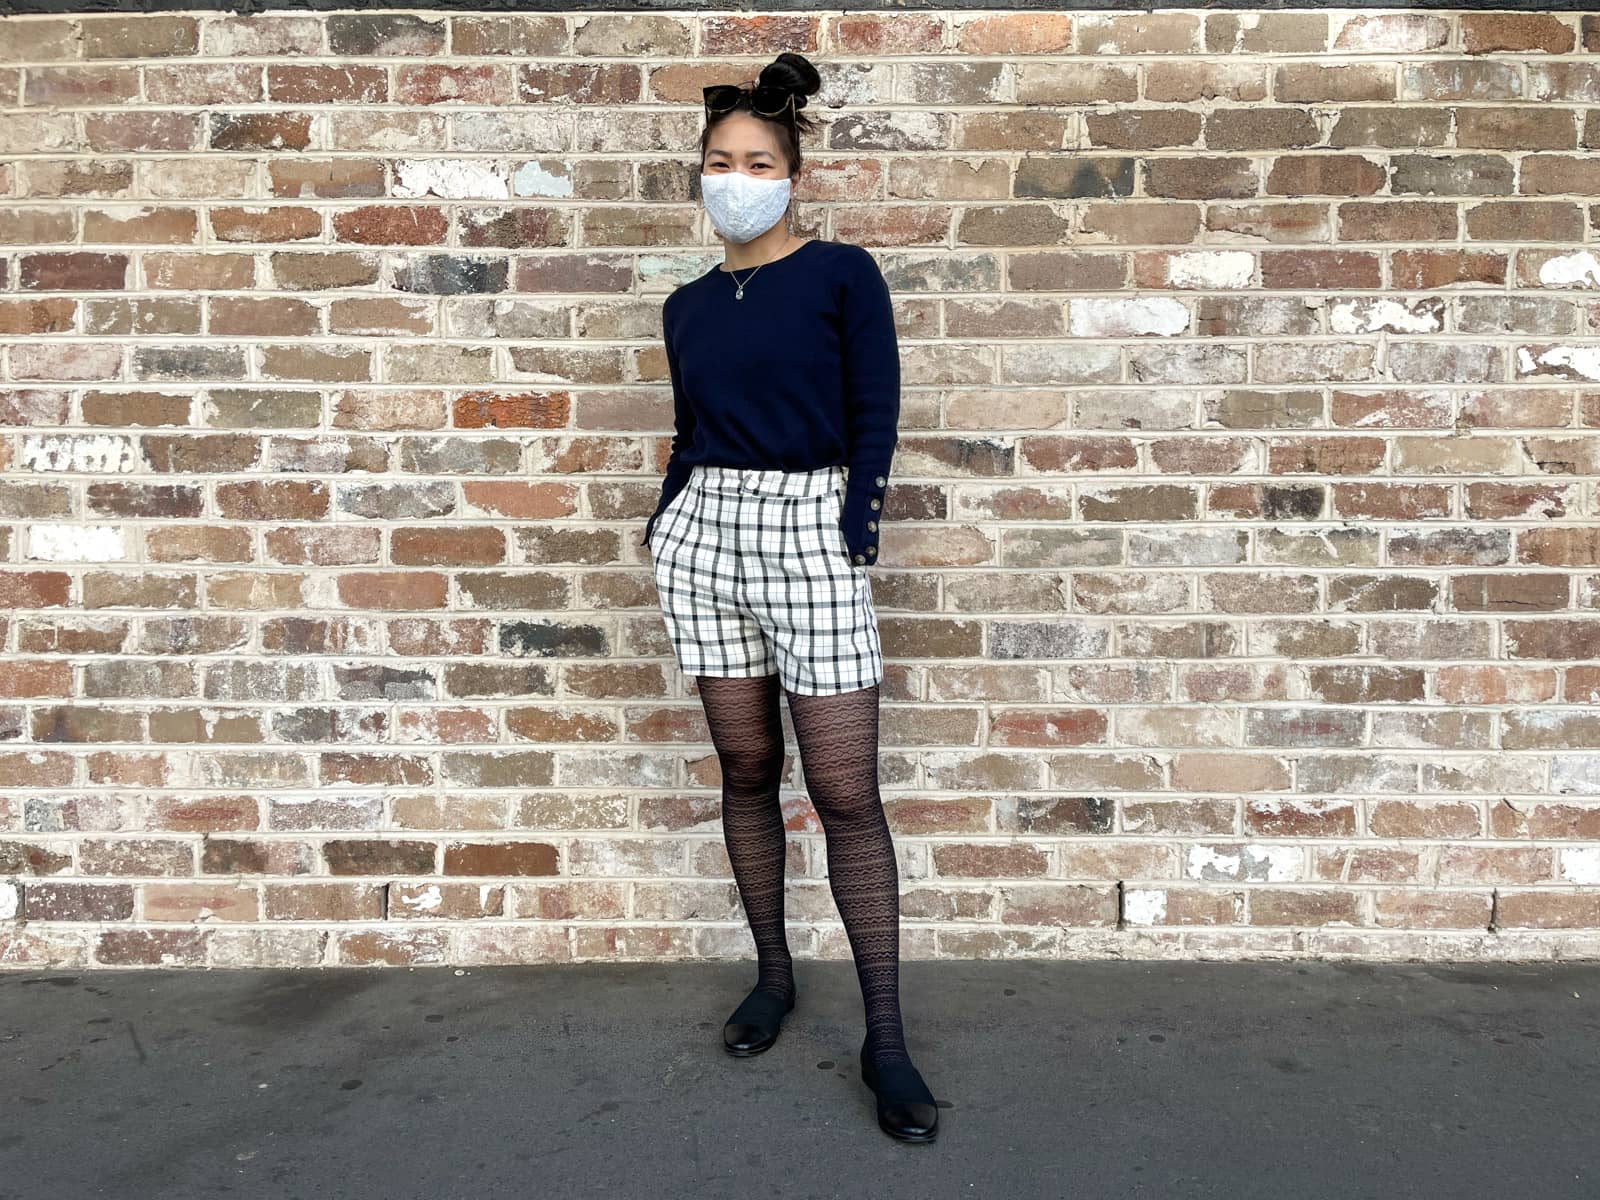 An Asian woman standing in front of a brown textured brick wall. She has dark hair tied back in a high bun. She is wearing a navy sweater with button details on the lower part of the sleeves, black and white checkered shorts, and lace patterned tights. She is wearing a lace face covering over her nose and mouth. Her hands are in her pockets.